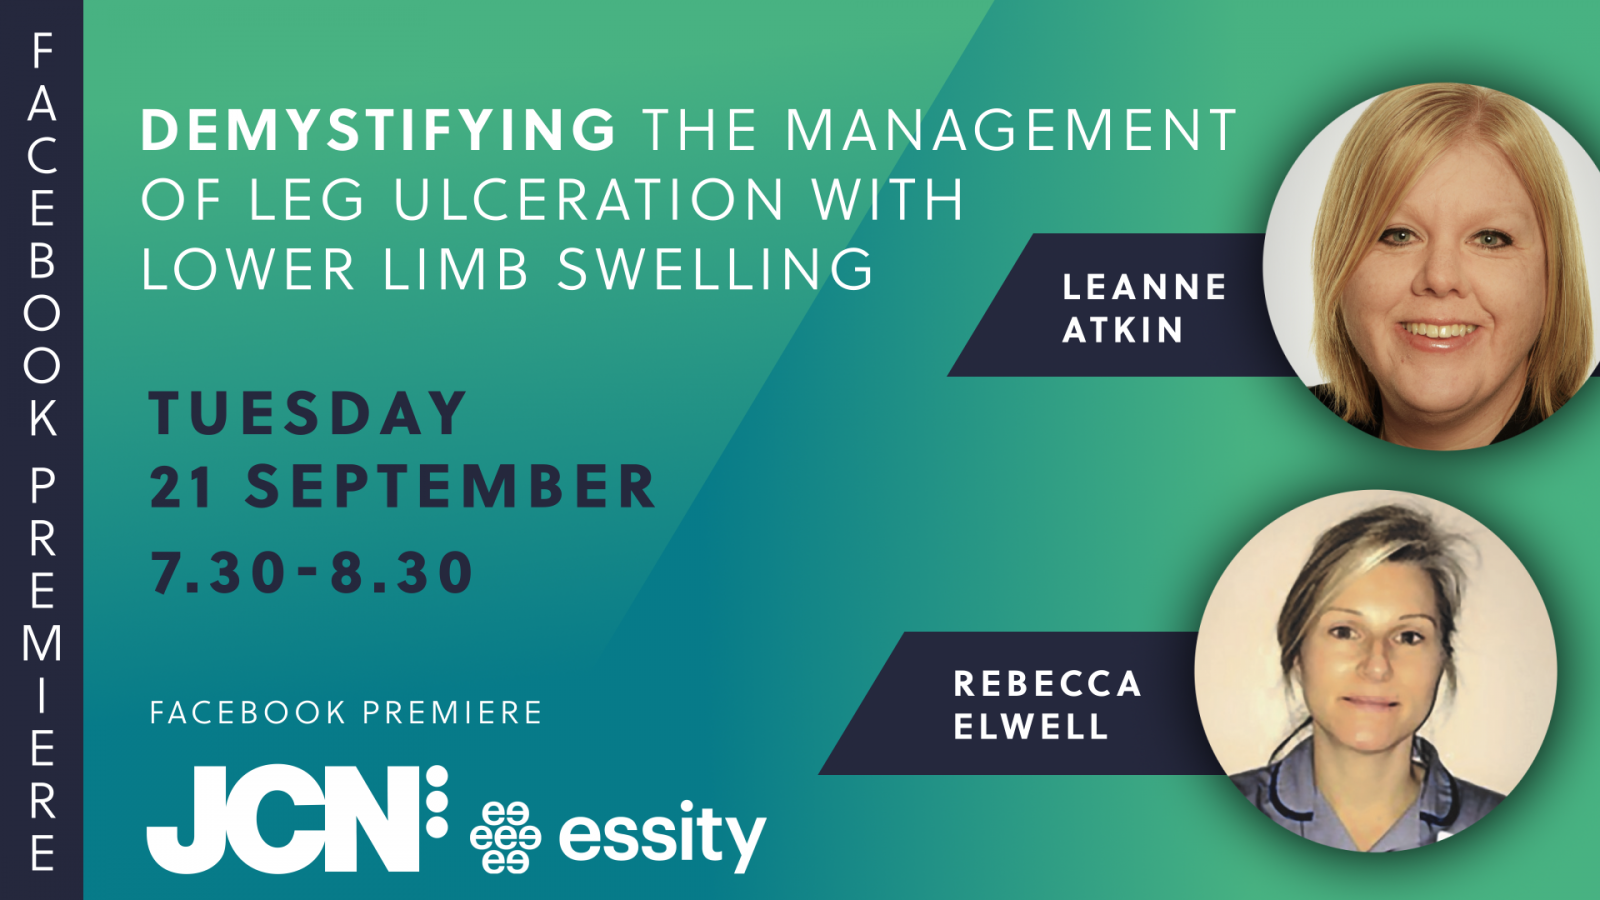 Facebook Live: Demystifying the management of leg ulceration with lower limb swelling - video